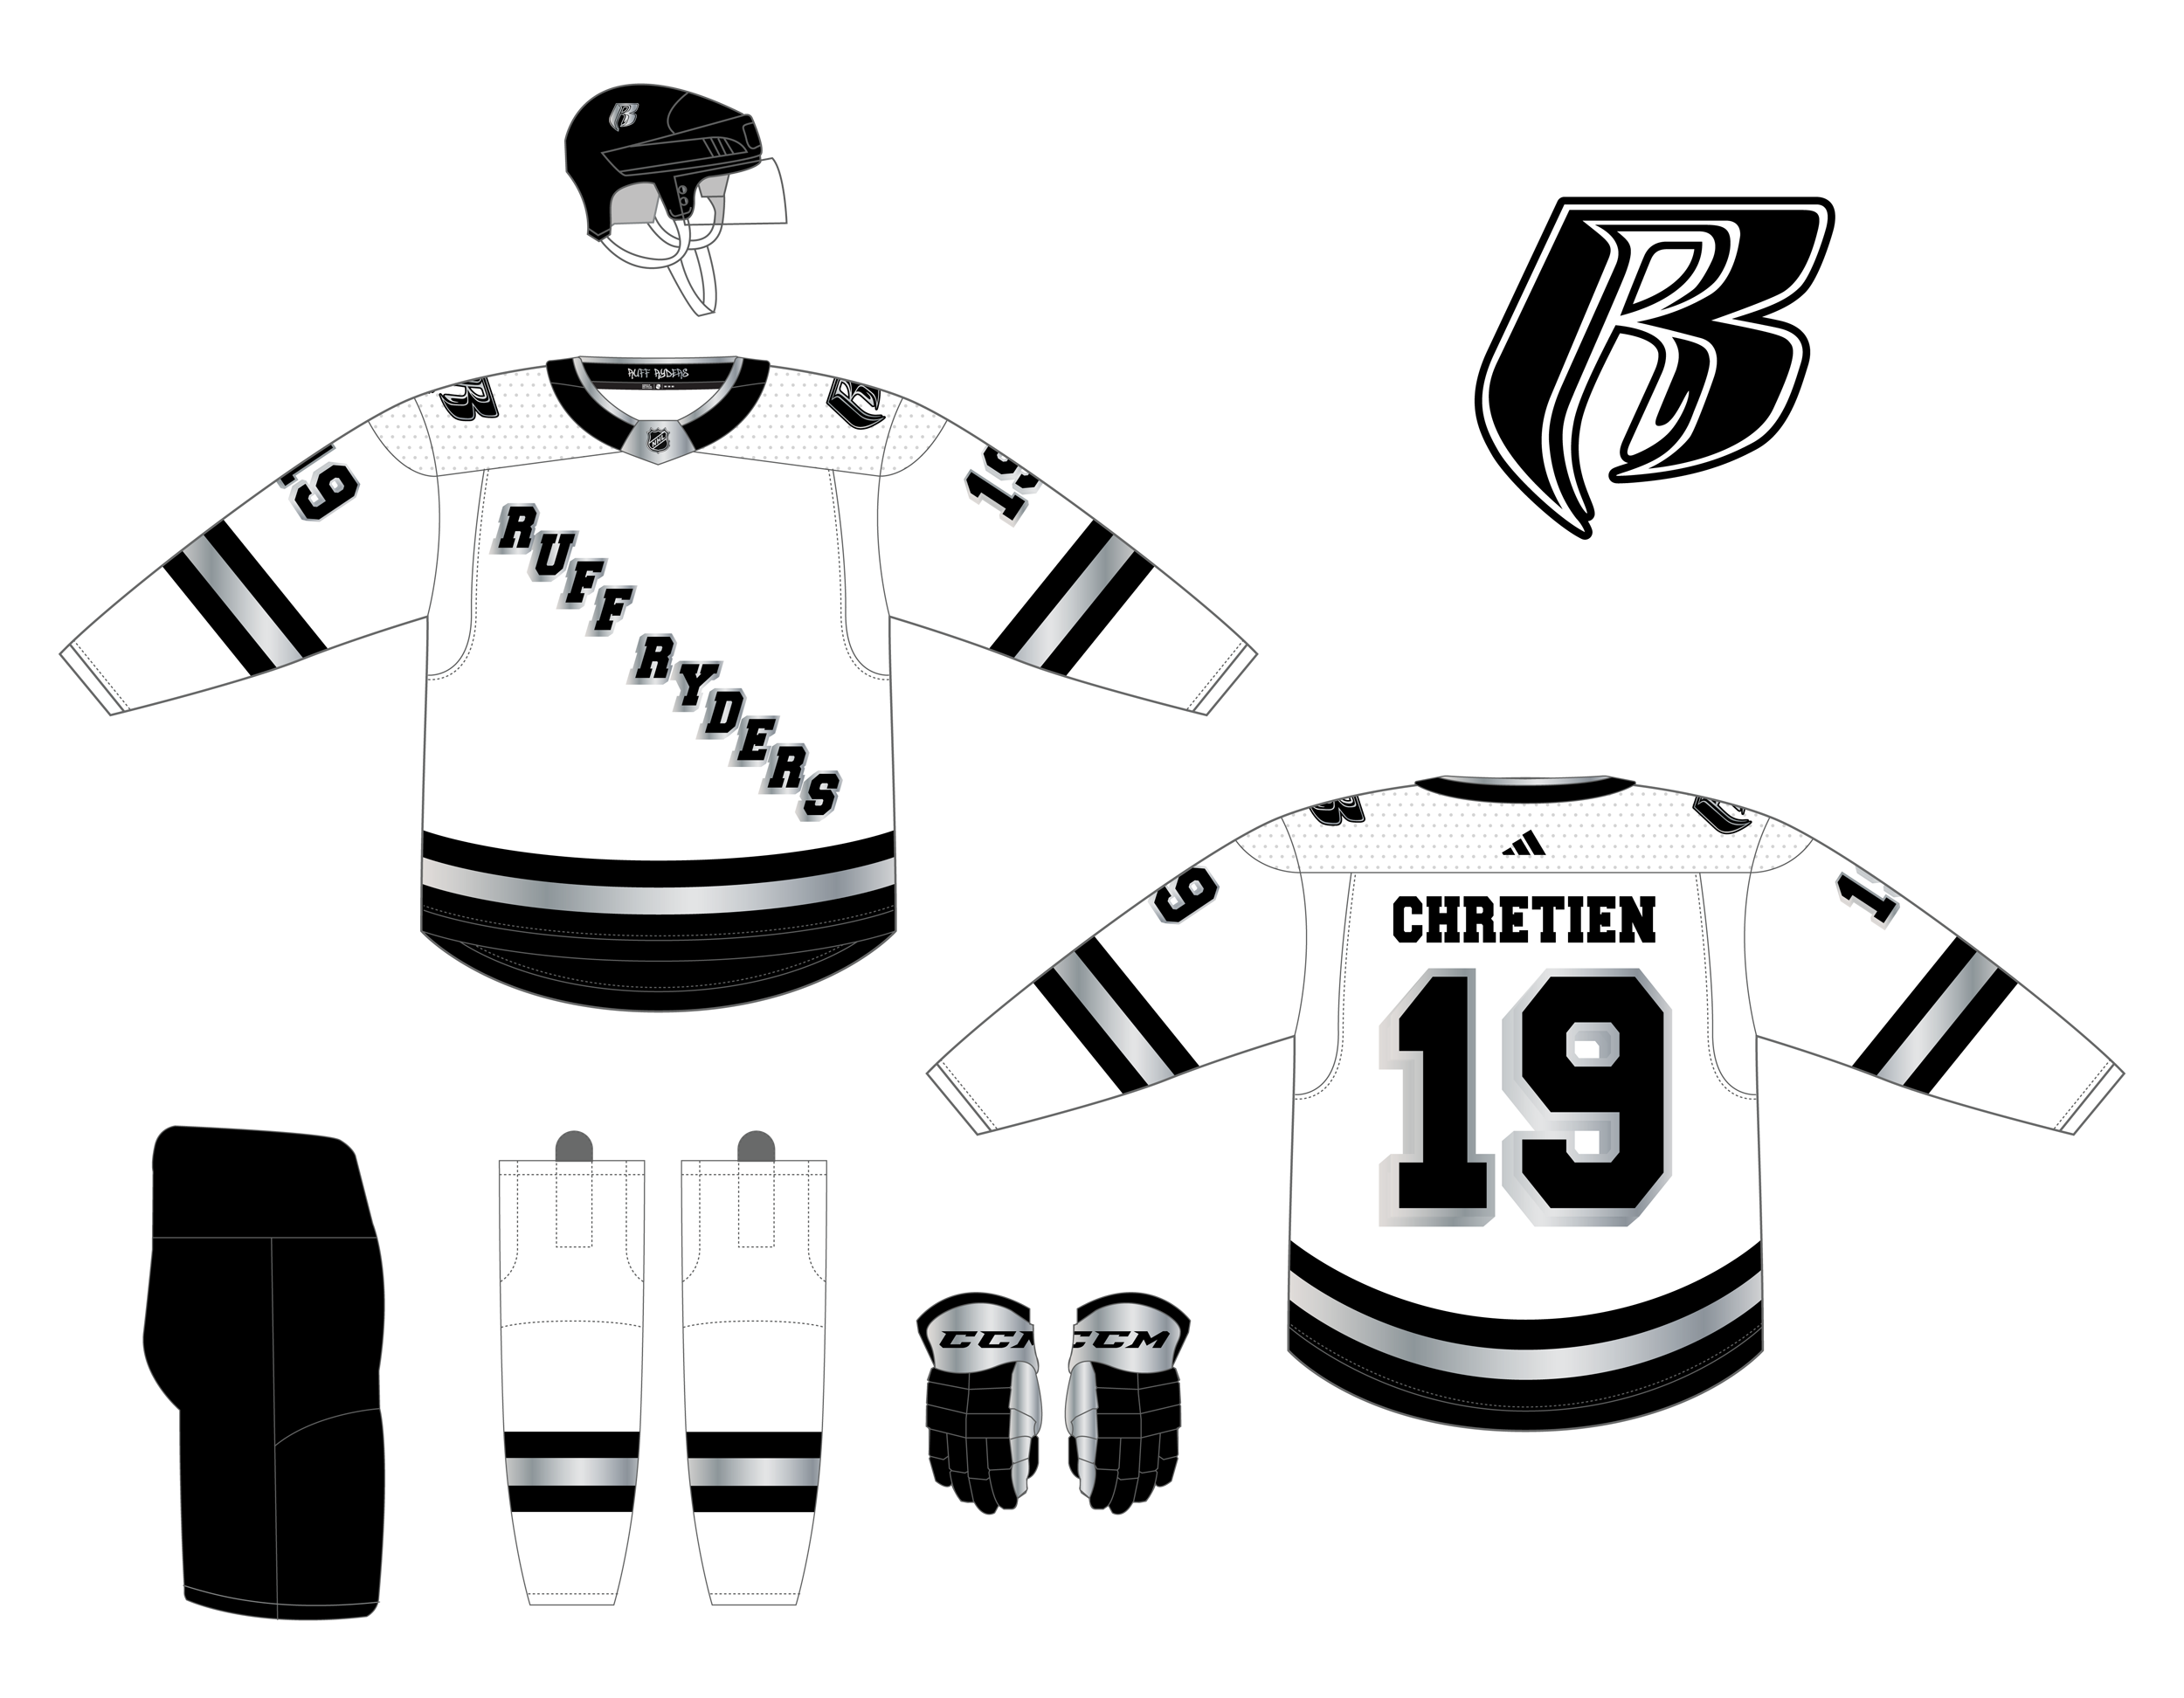 NHL Jersey Mashup - Got one more concept for my Pittsburgh